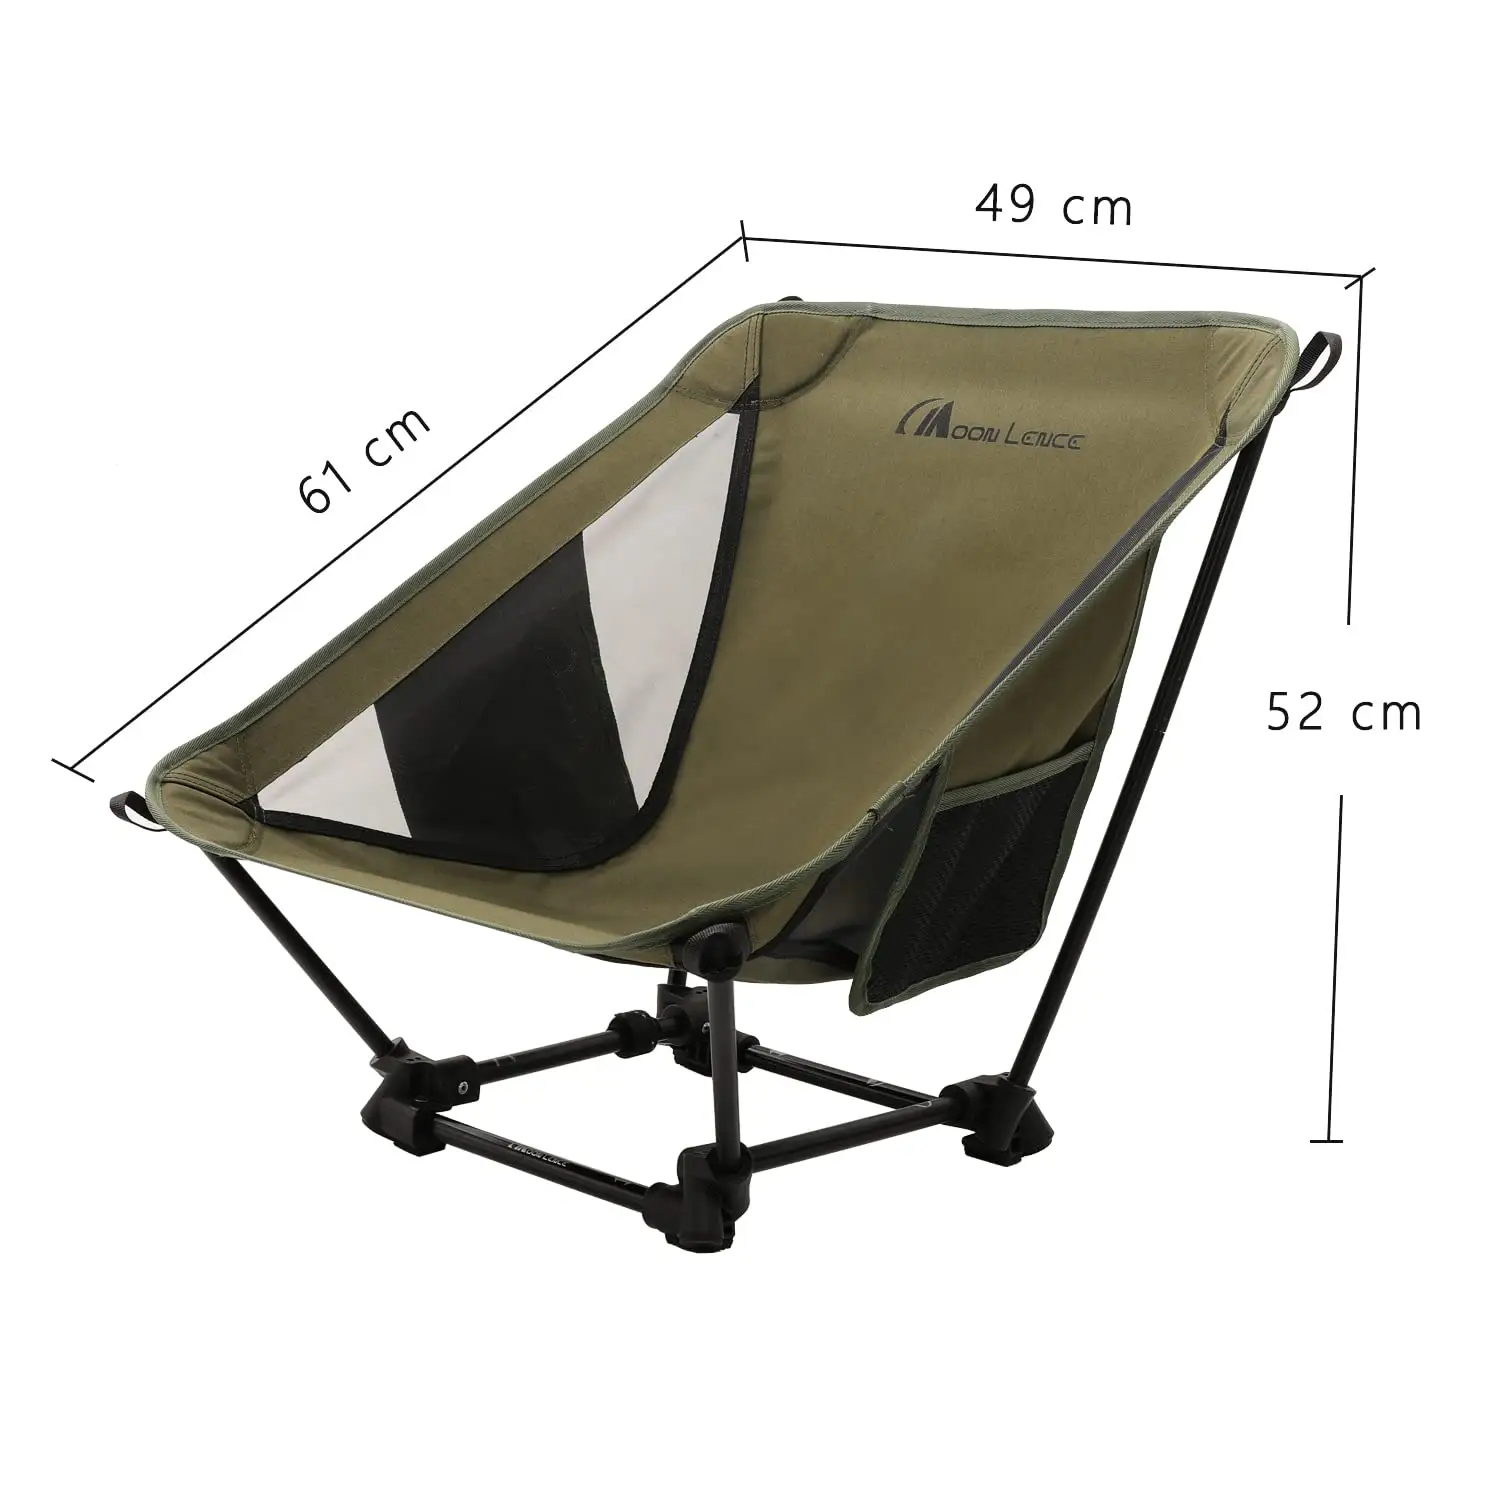 MOONLENCE Folding Aluminum Lightweight Small Compact Portable Chair Without Leg For Camping Beach Hike Travel